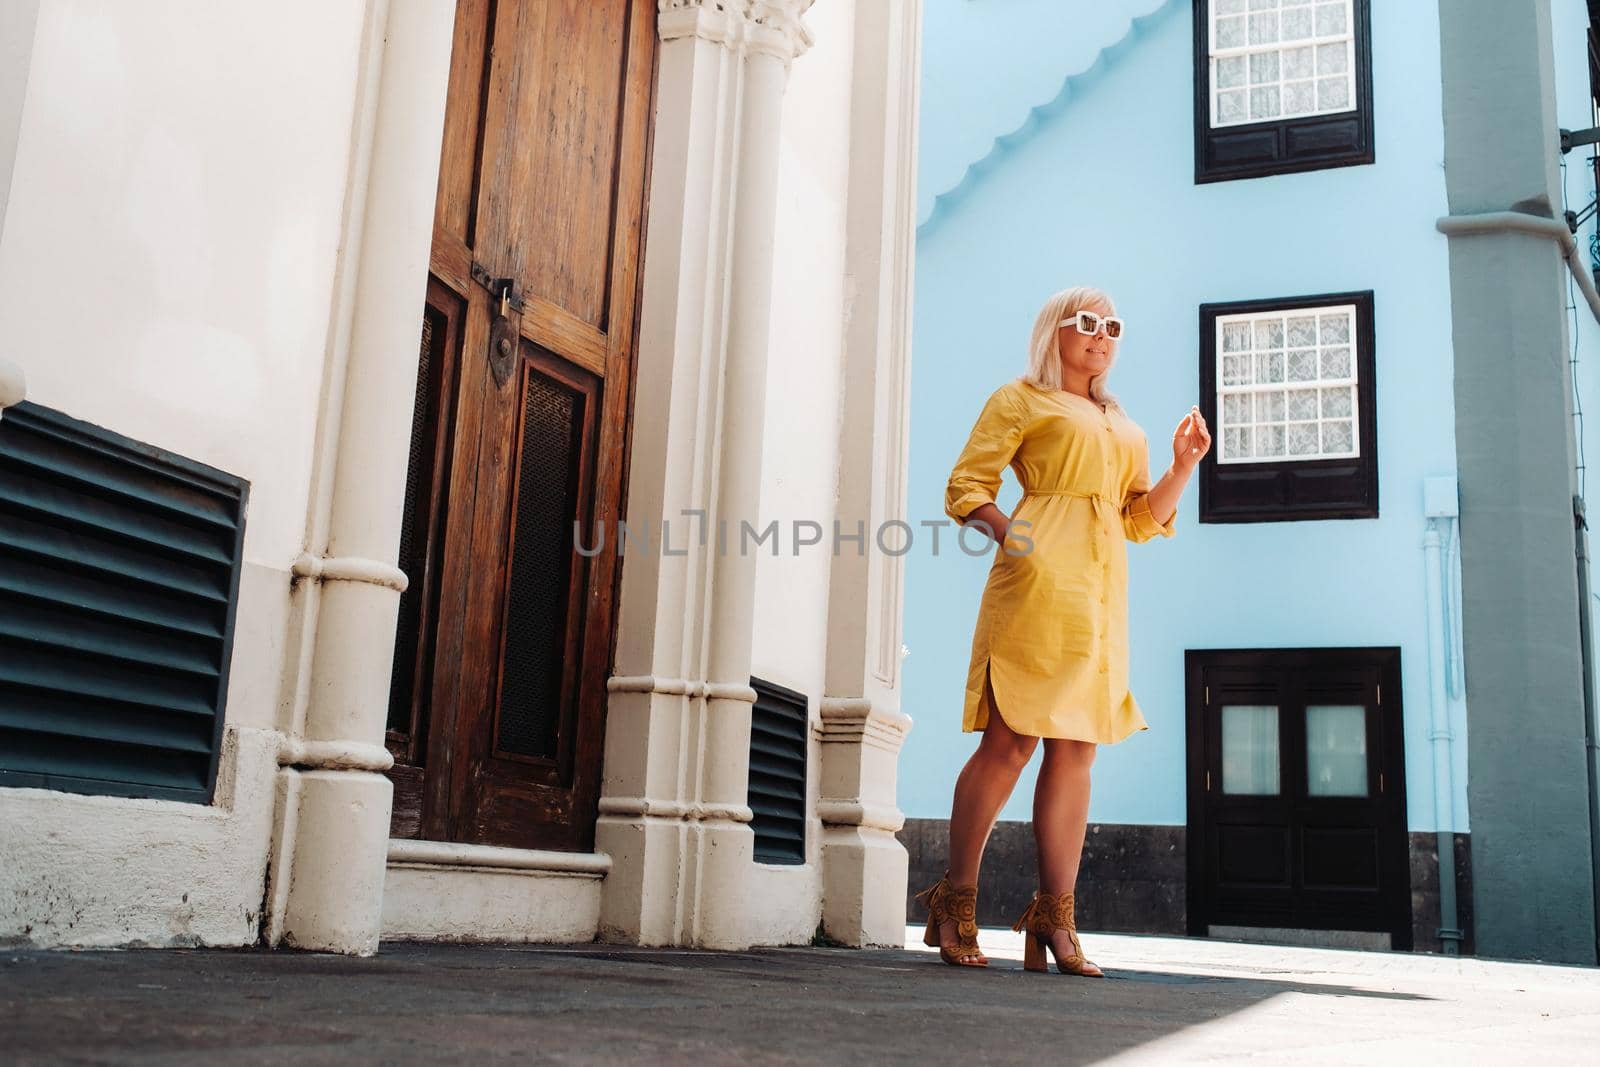 a blonde woman in a yellow summer dress stands on the street of the Old town of La Laguna on the island of Tenerife.Spain, Canary Islands.